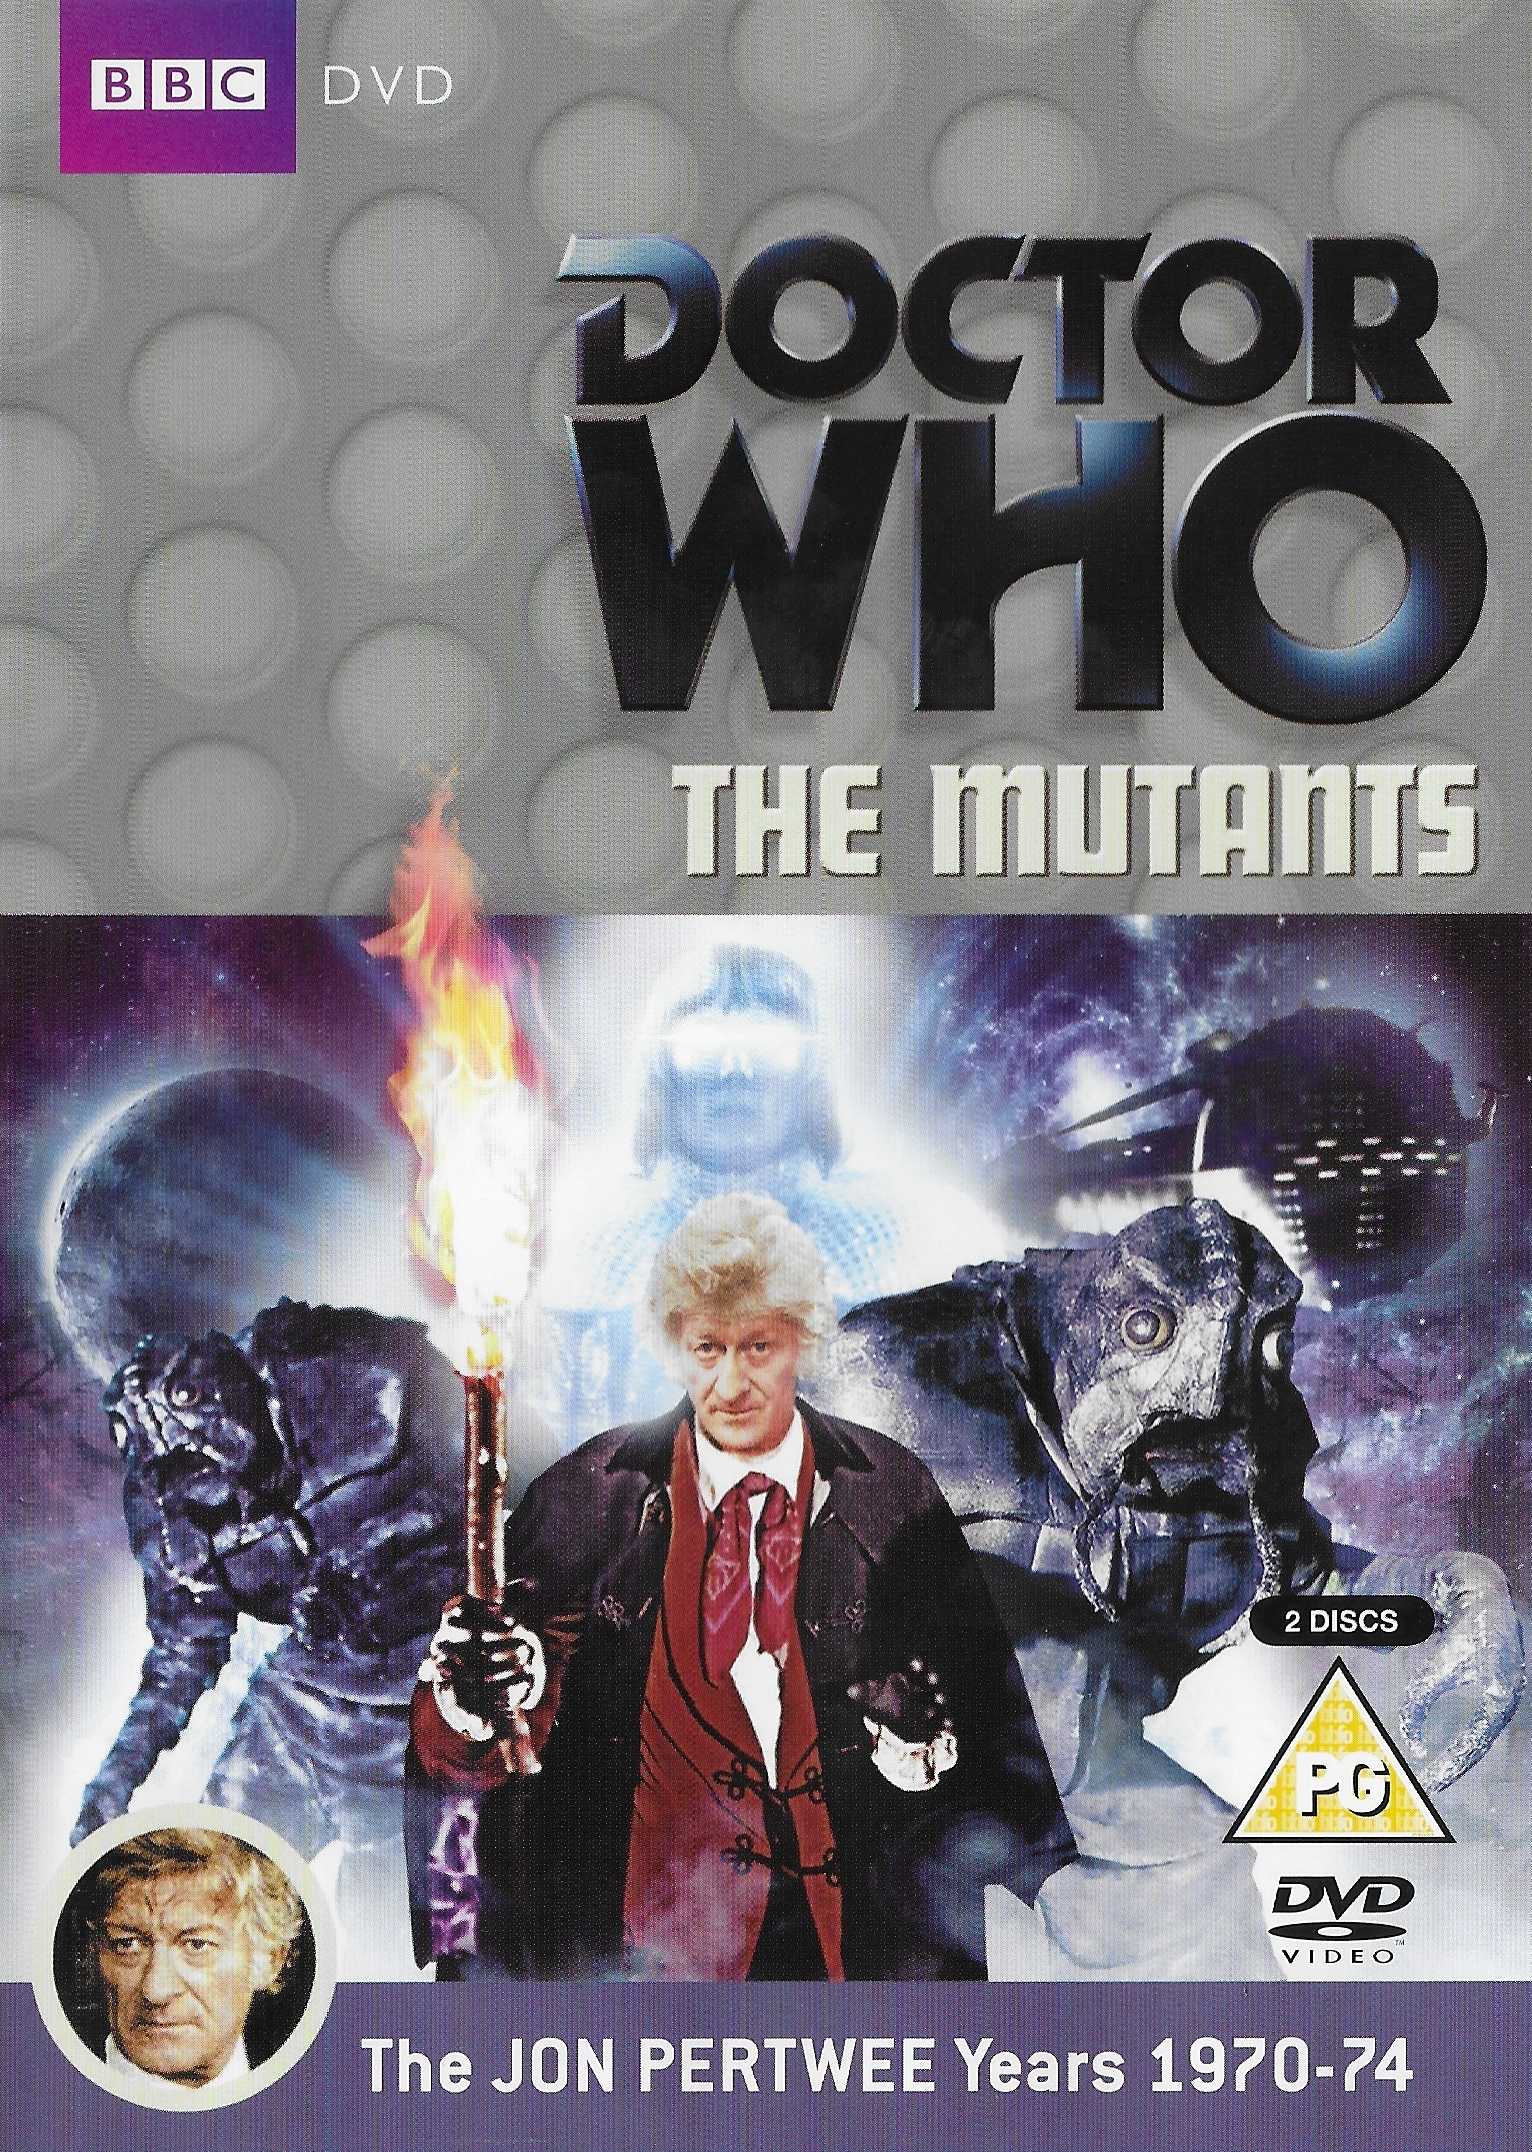 Picture of BBCDVD 3042 Doctor Who - The mutants by artist Bob Baker / Dave Martin from the BBC dvds - Records and Tapes library